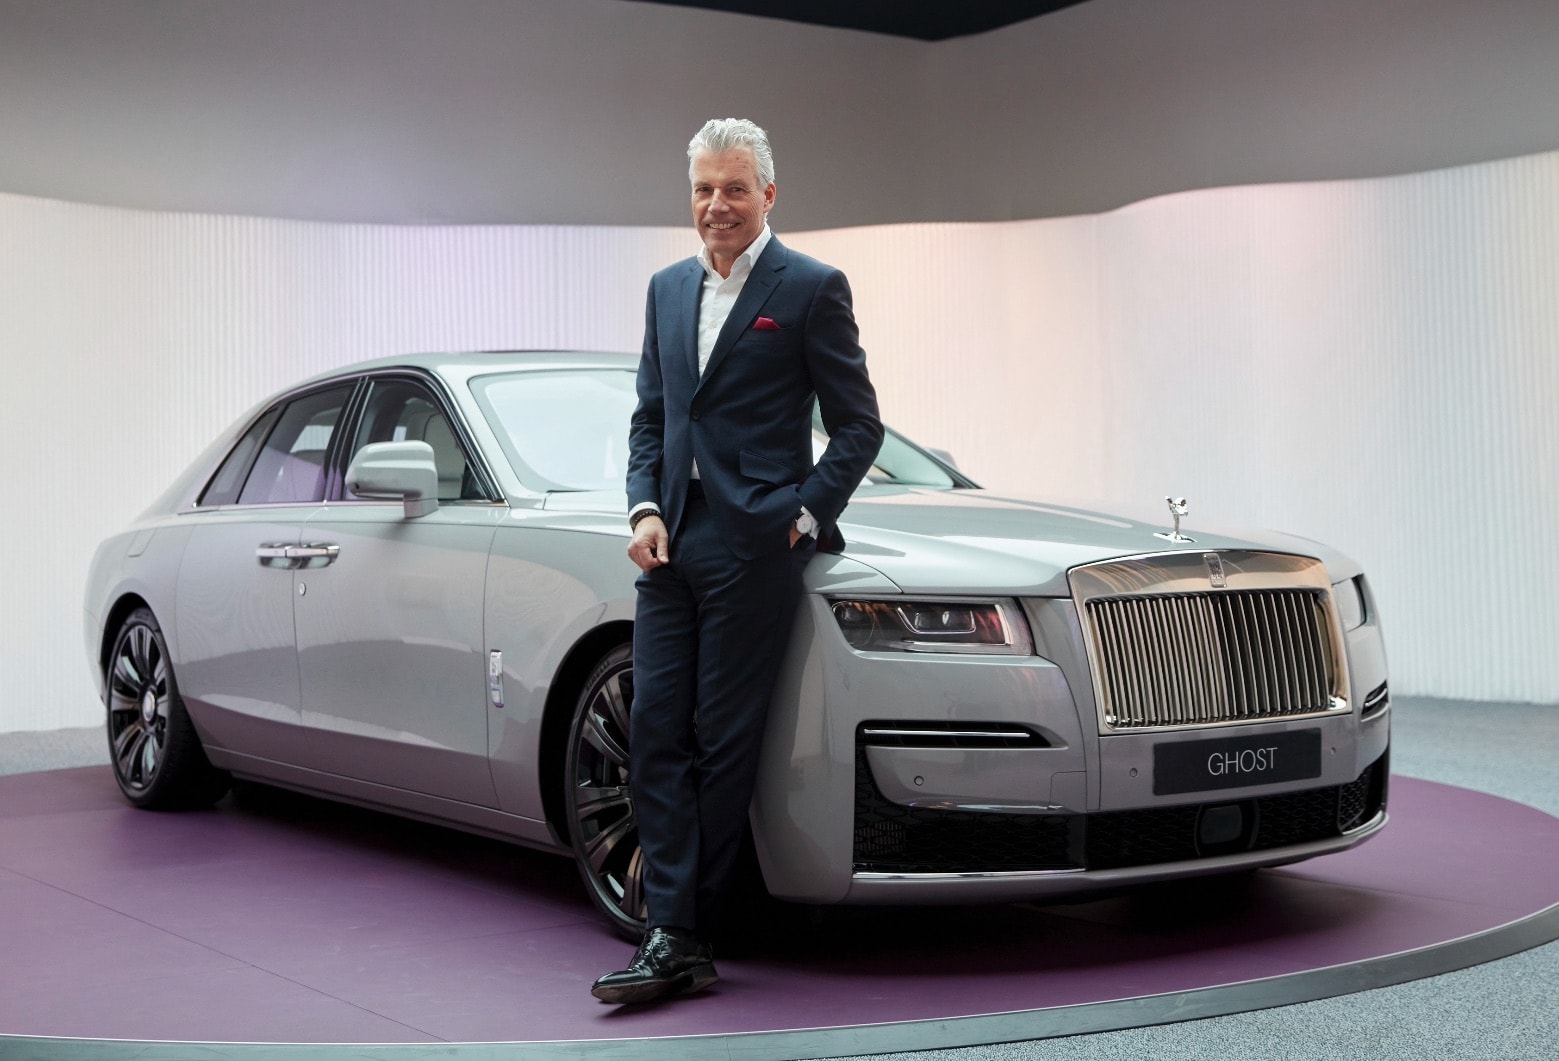 Rolls-Royce unveils its 1st fully electric car with $400K price tag: Spectre